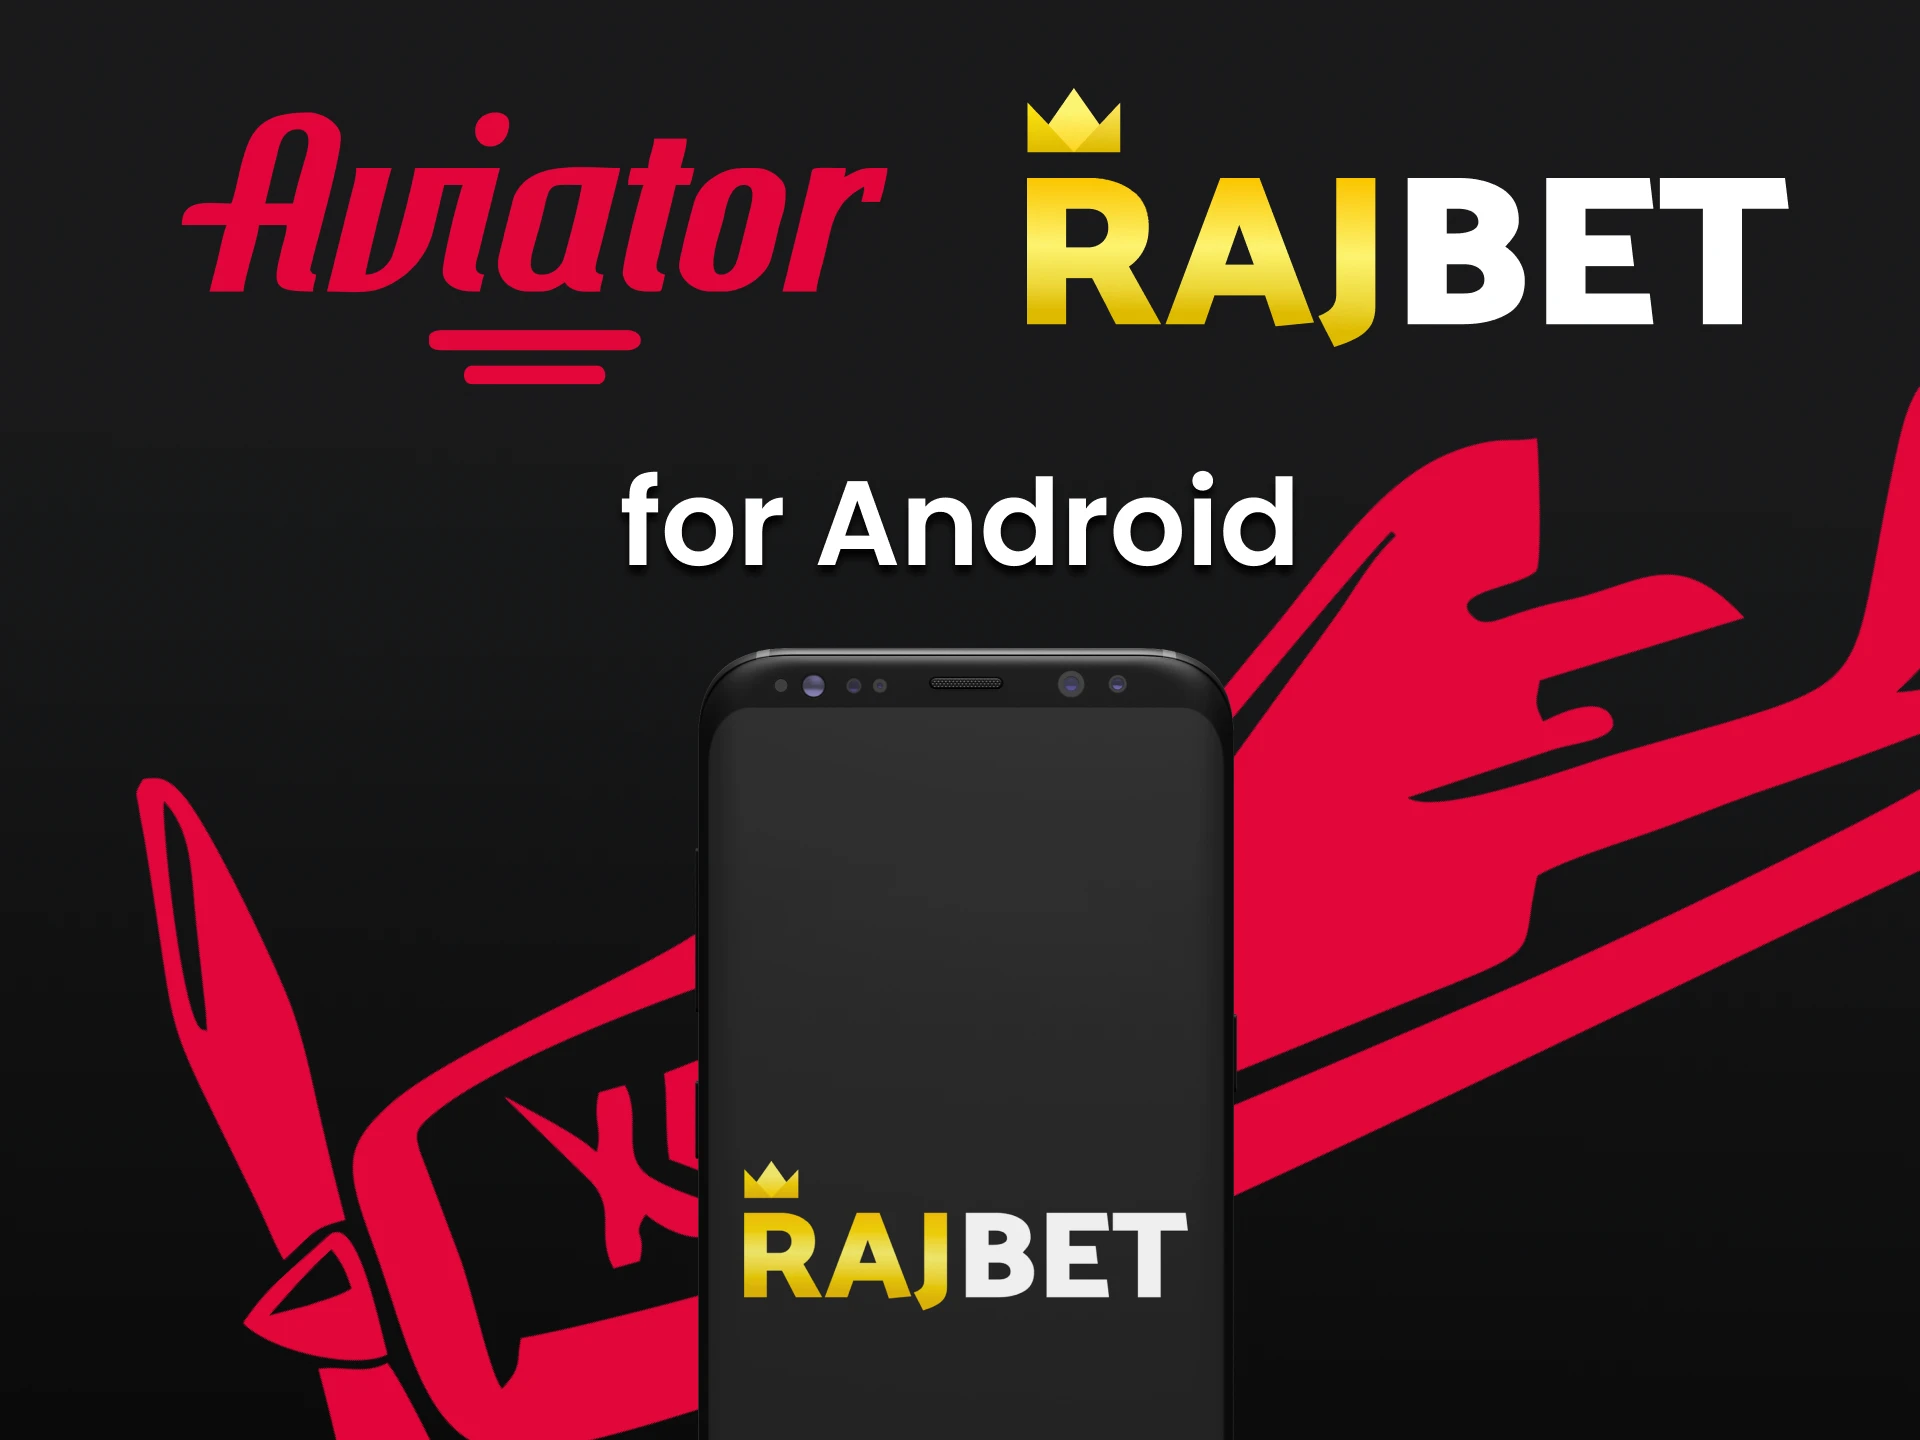 Use Rajbet android app to play Aviator.